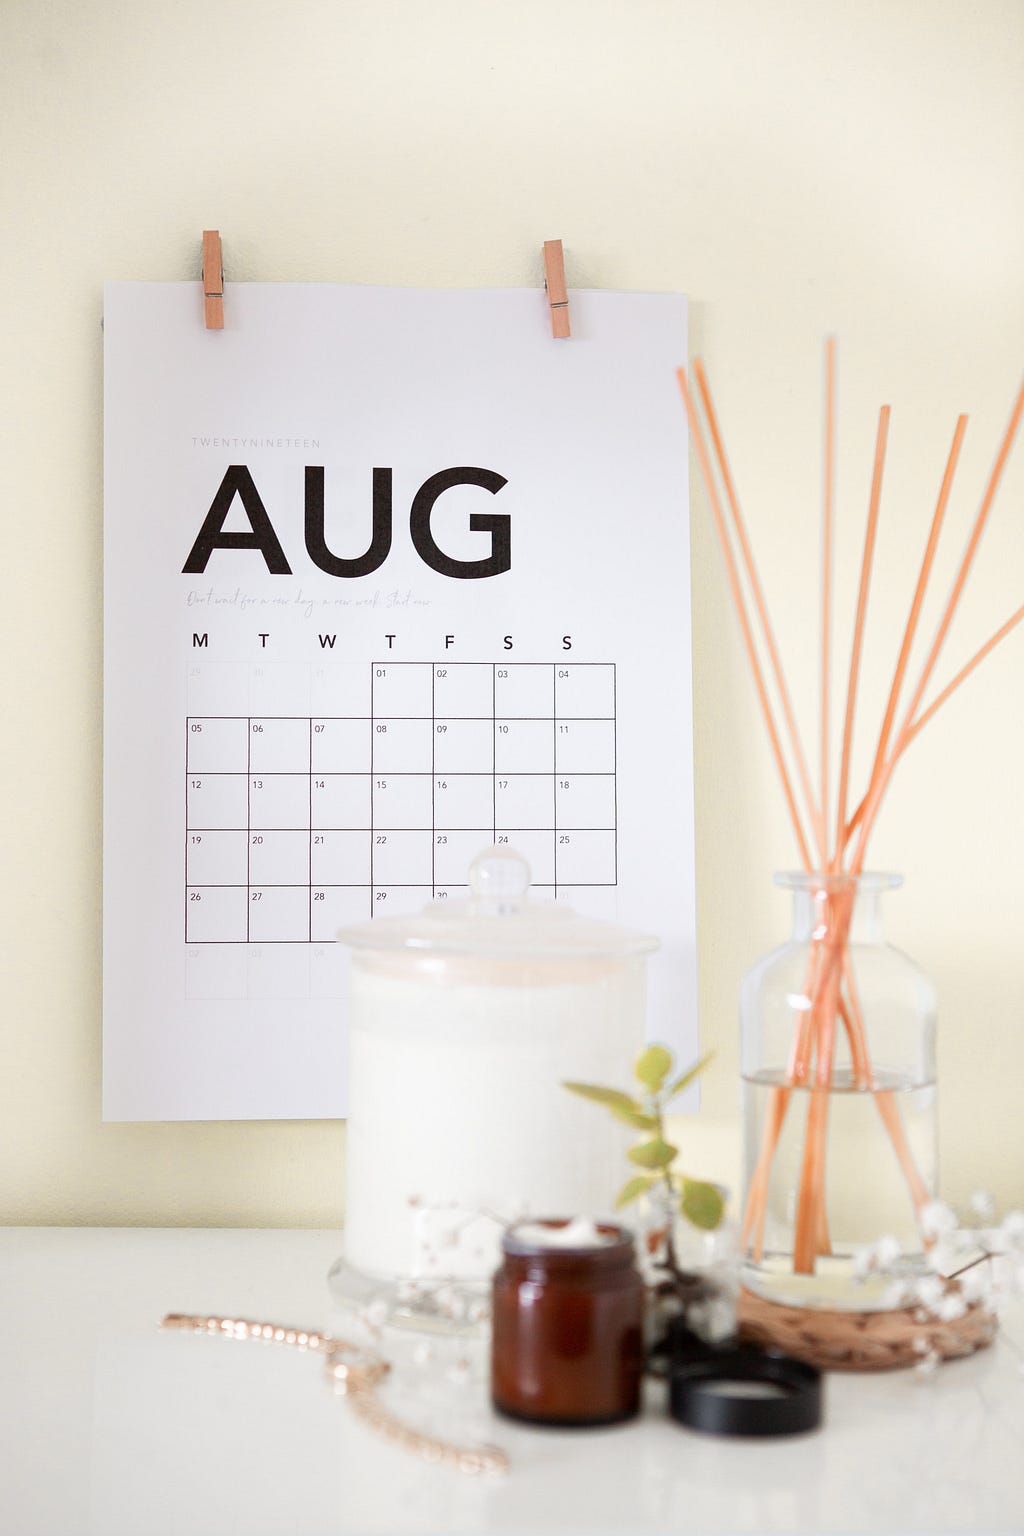 A wall calendar that reads “AUG” and displays the dates below.